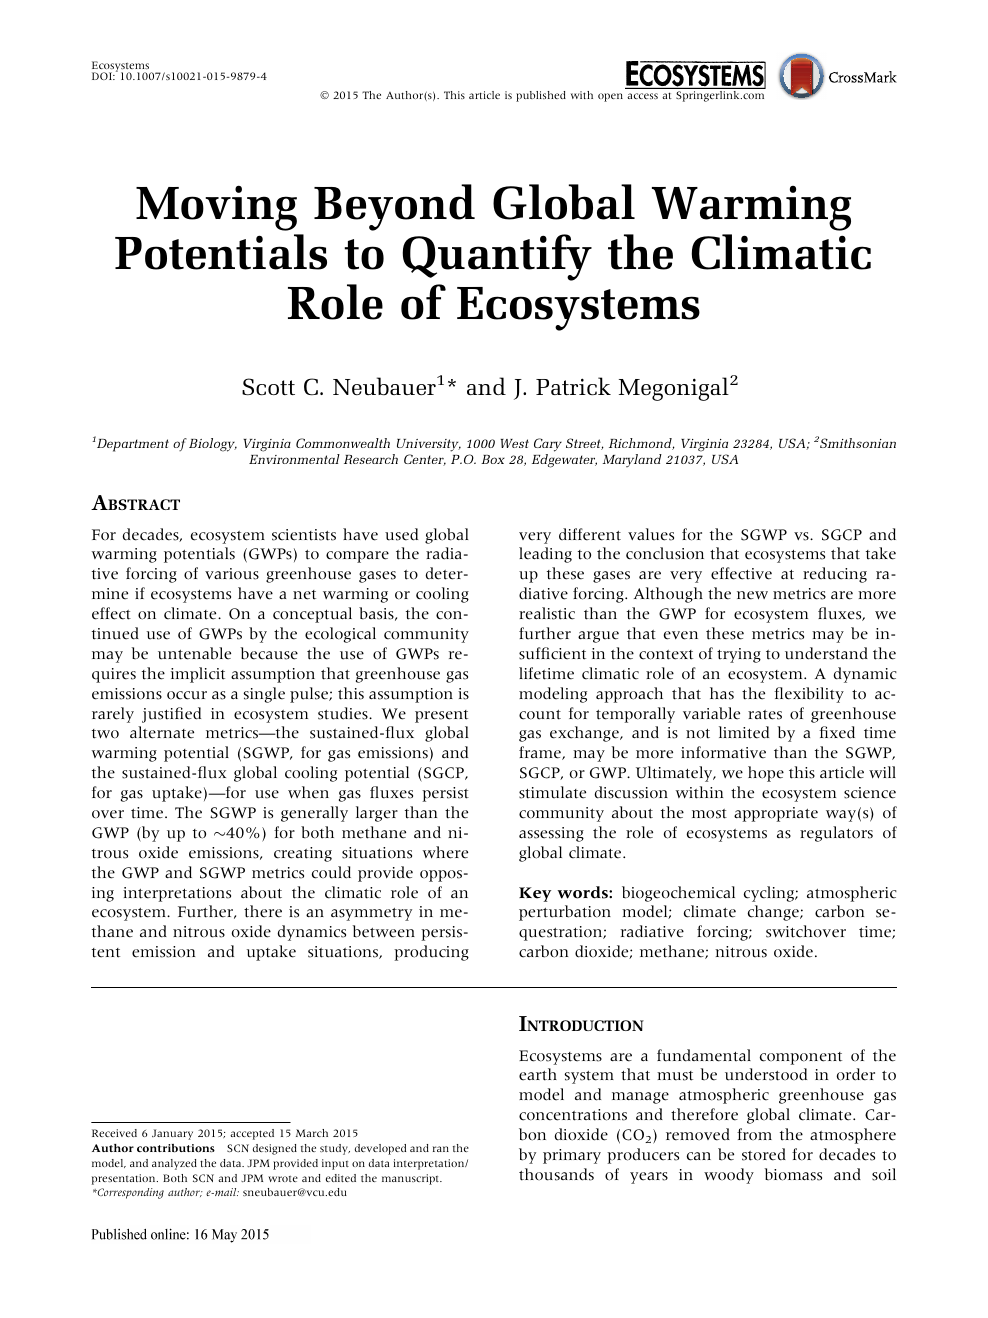 global warming research paper